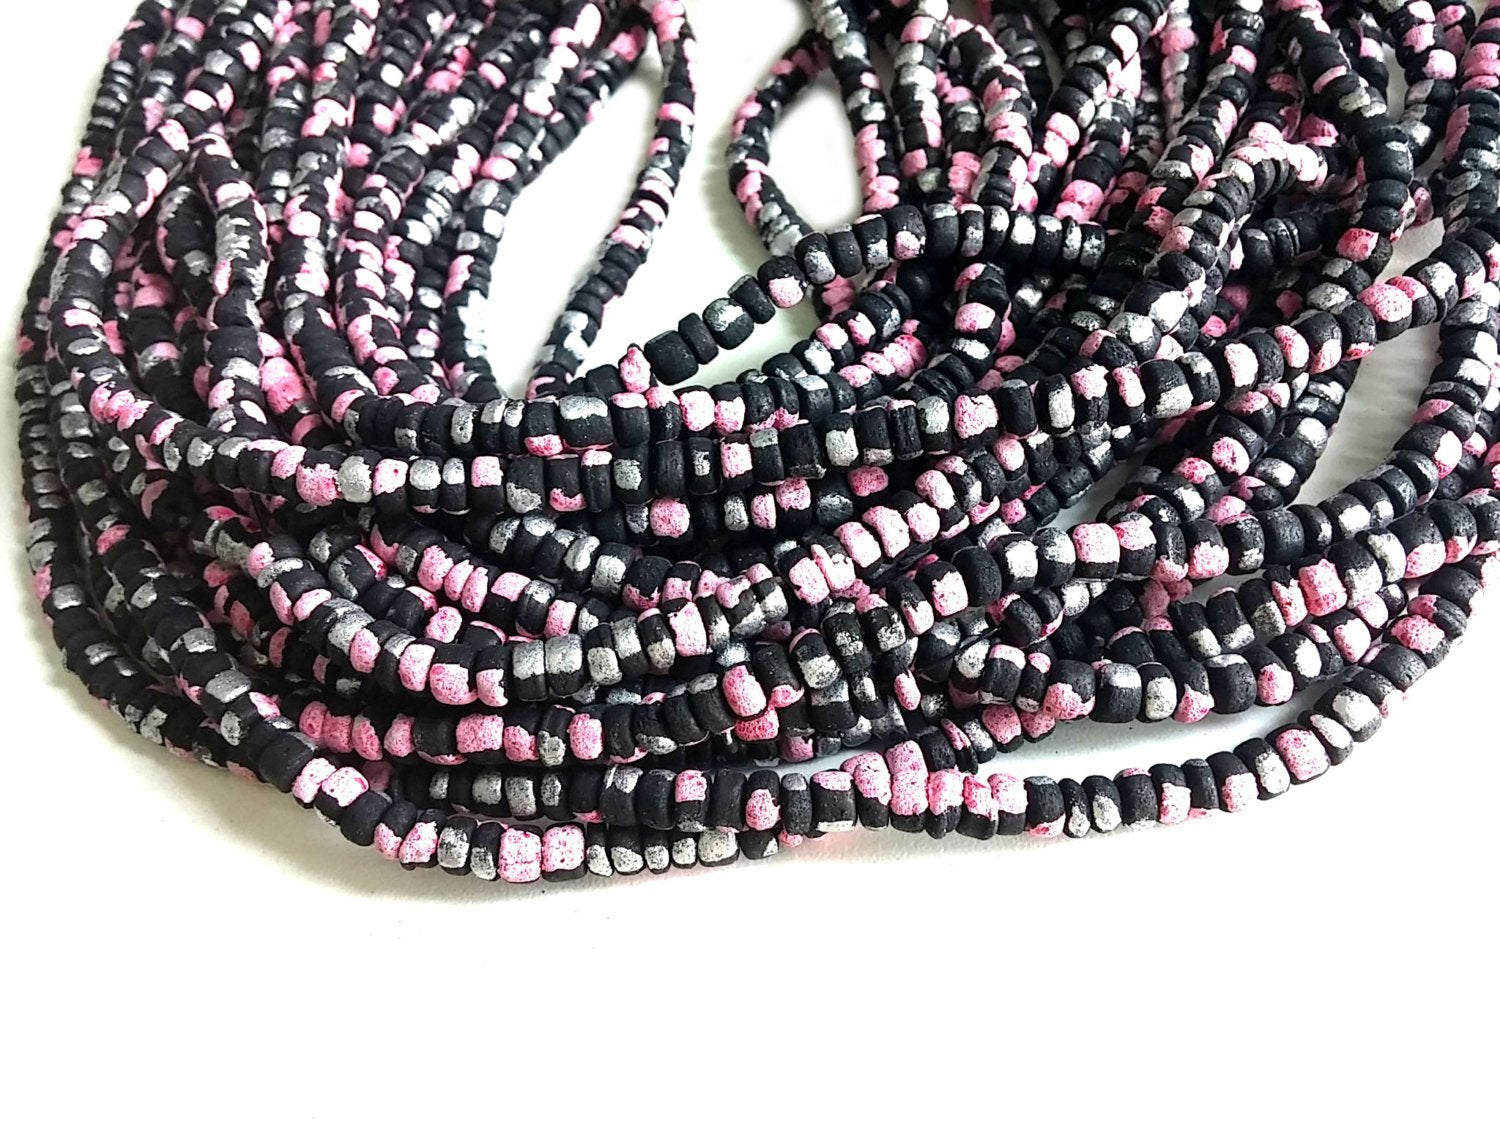 150 coconut beads marblized black, pink and silver splashing 4-5mm